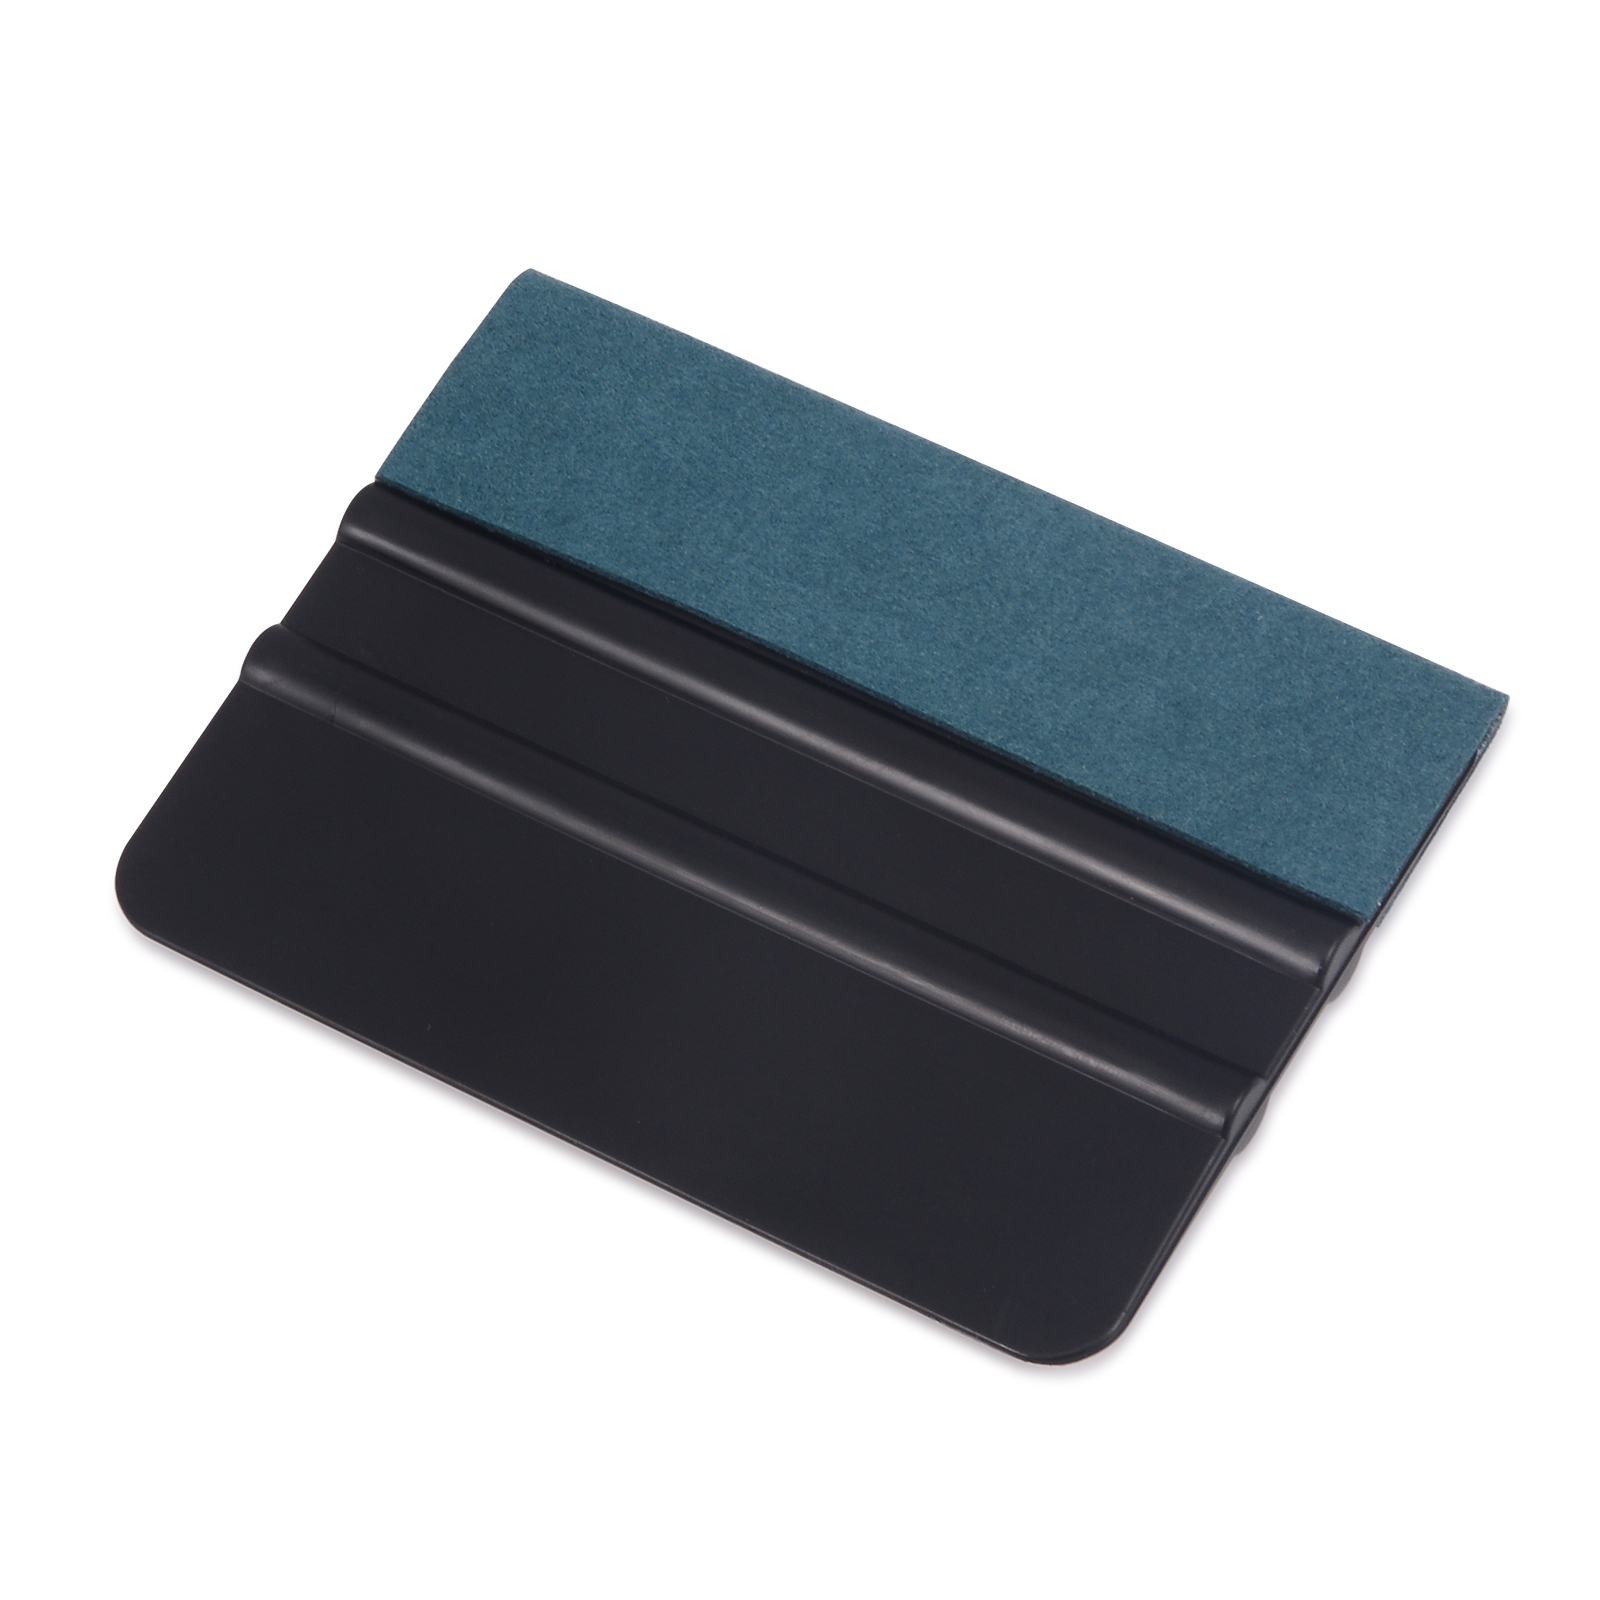 3M 4'' x 3'' Black Squeege, Medium Hardness, with Blue Suede Felt for Vinyl and Film Application